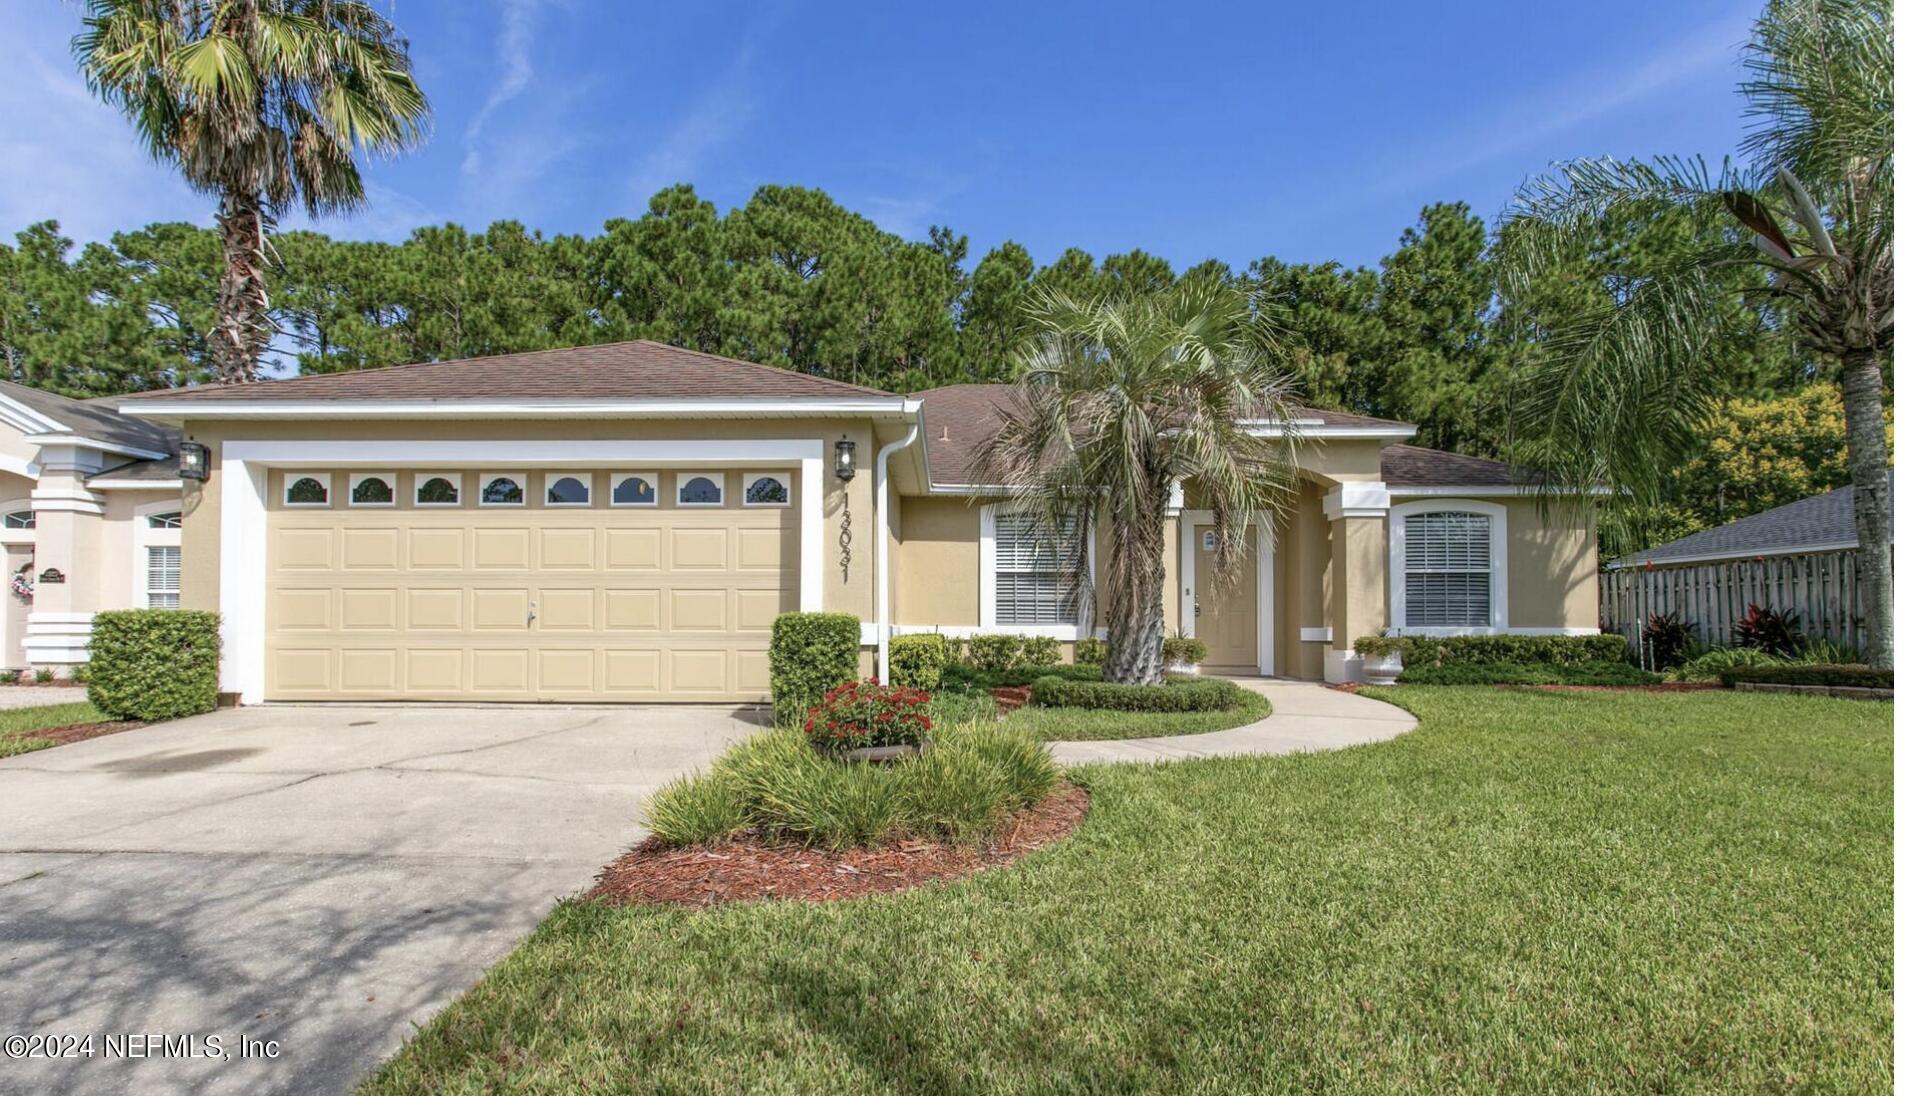 Jacksonville, FL home for sale located at 13031 Chets Creek Drive N, Jacksonville, FL 32224